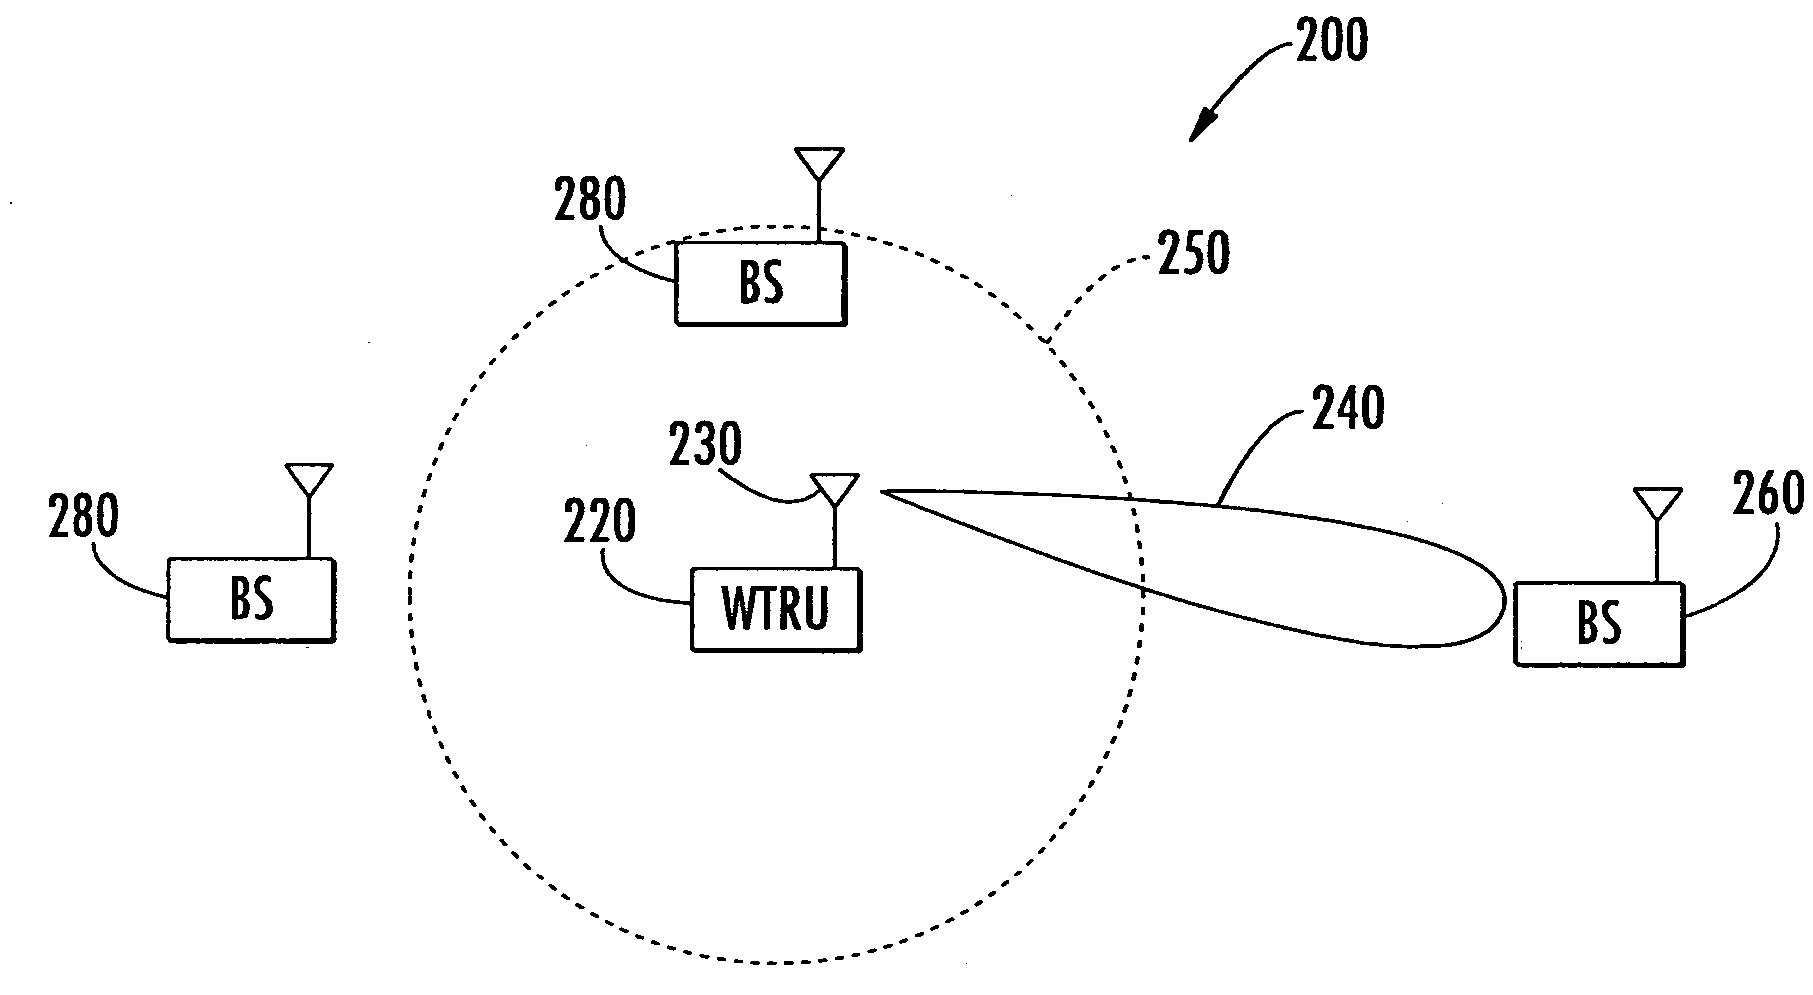 Method for identifying pre-candidate cells for a mobile unit operating with a switched beam antenna in a wireless communication system, and corresponding system